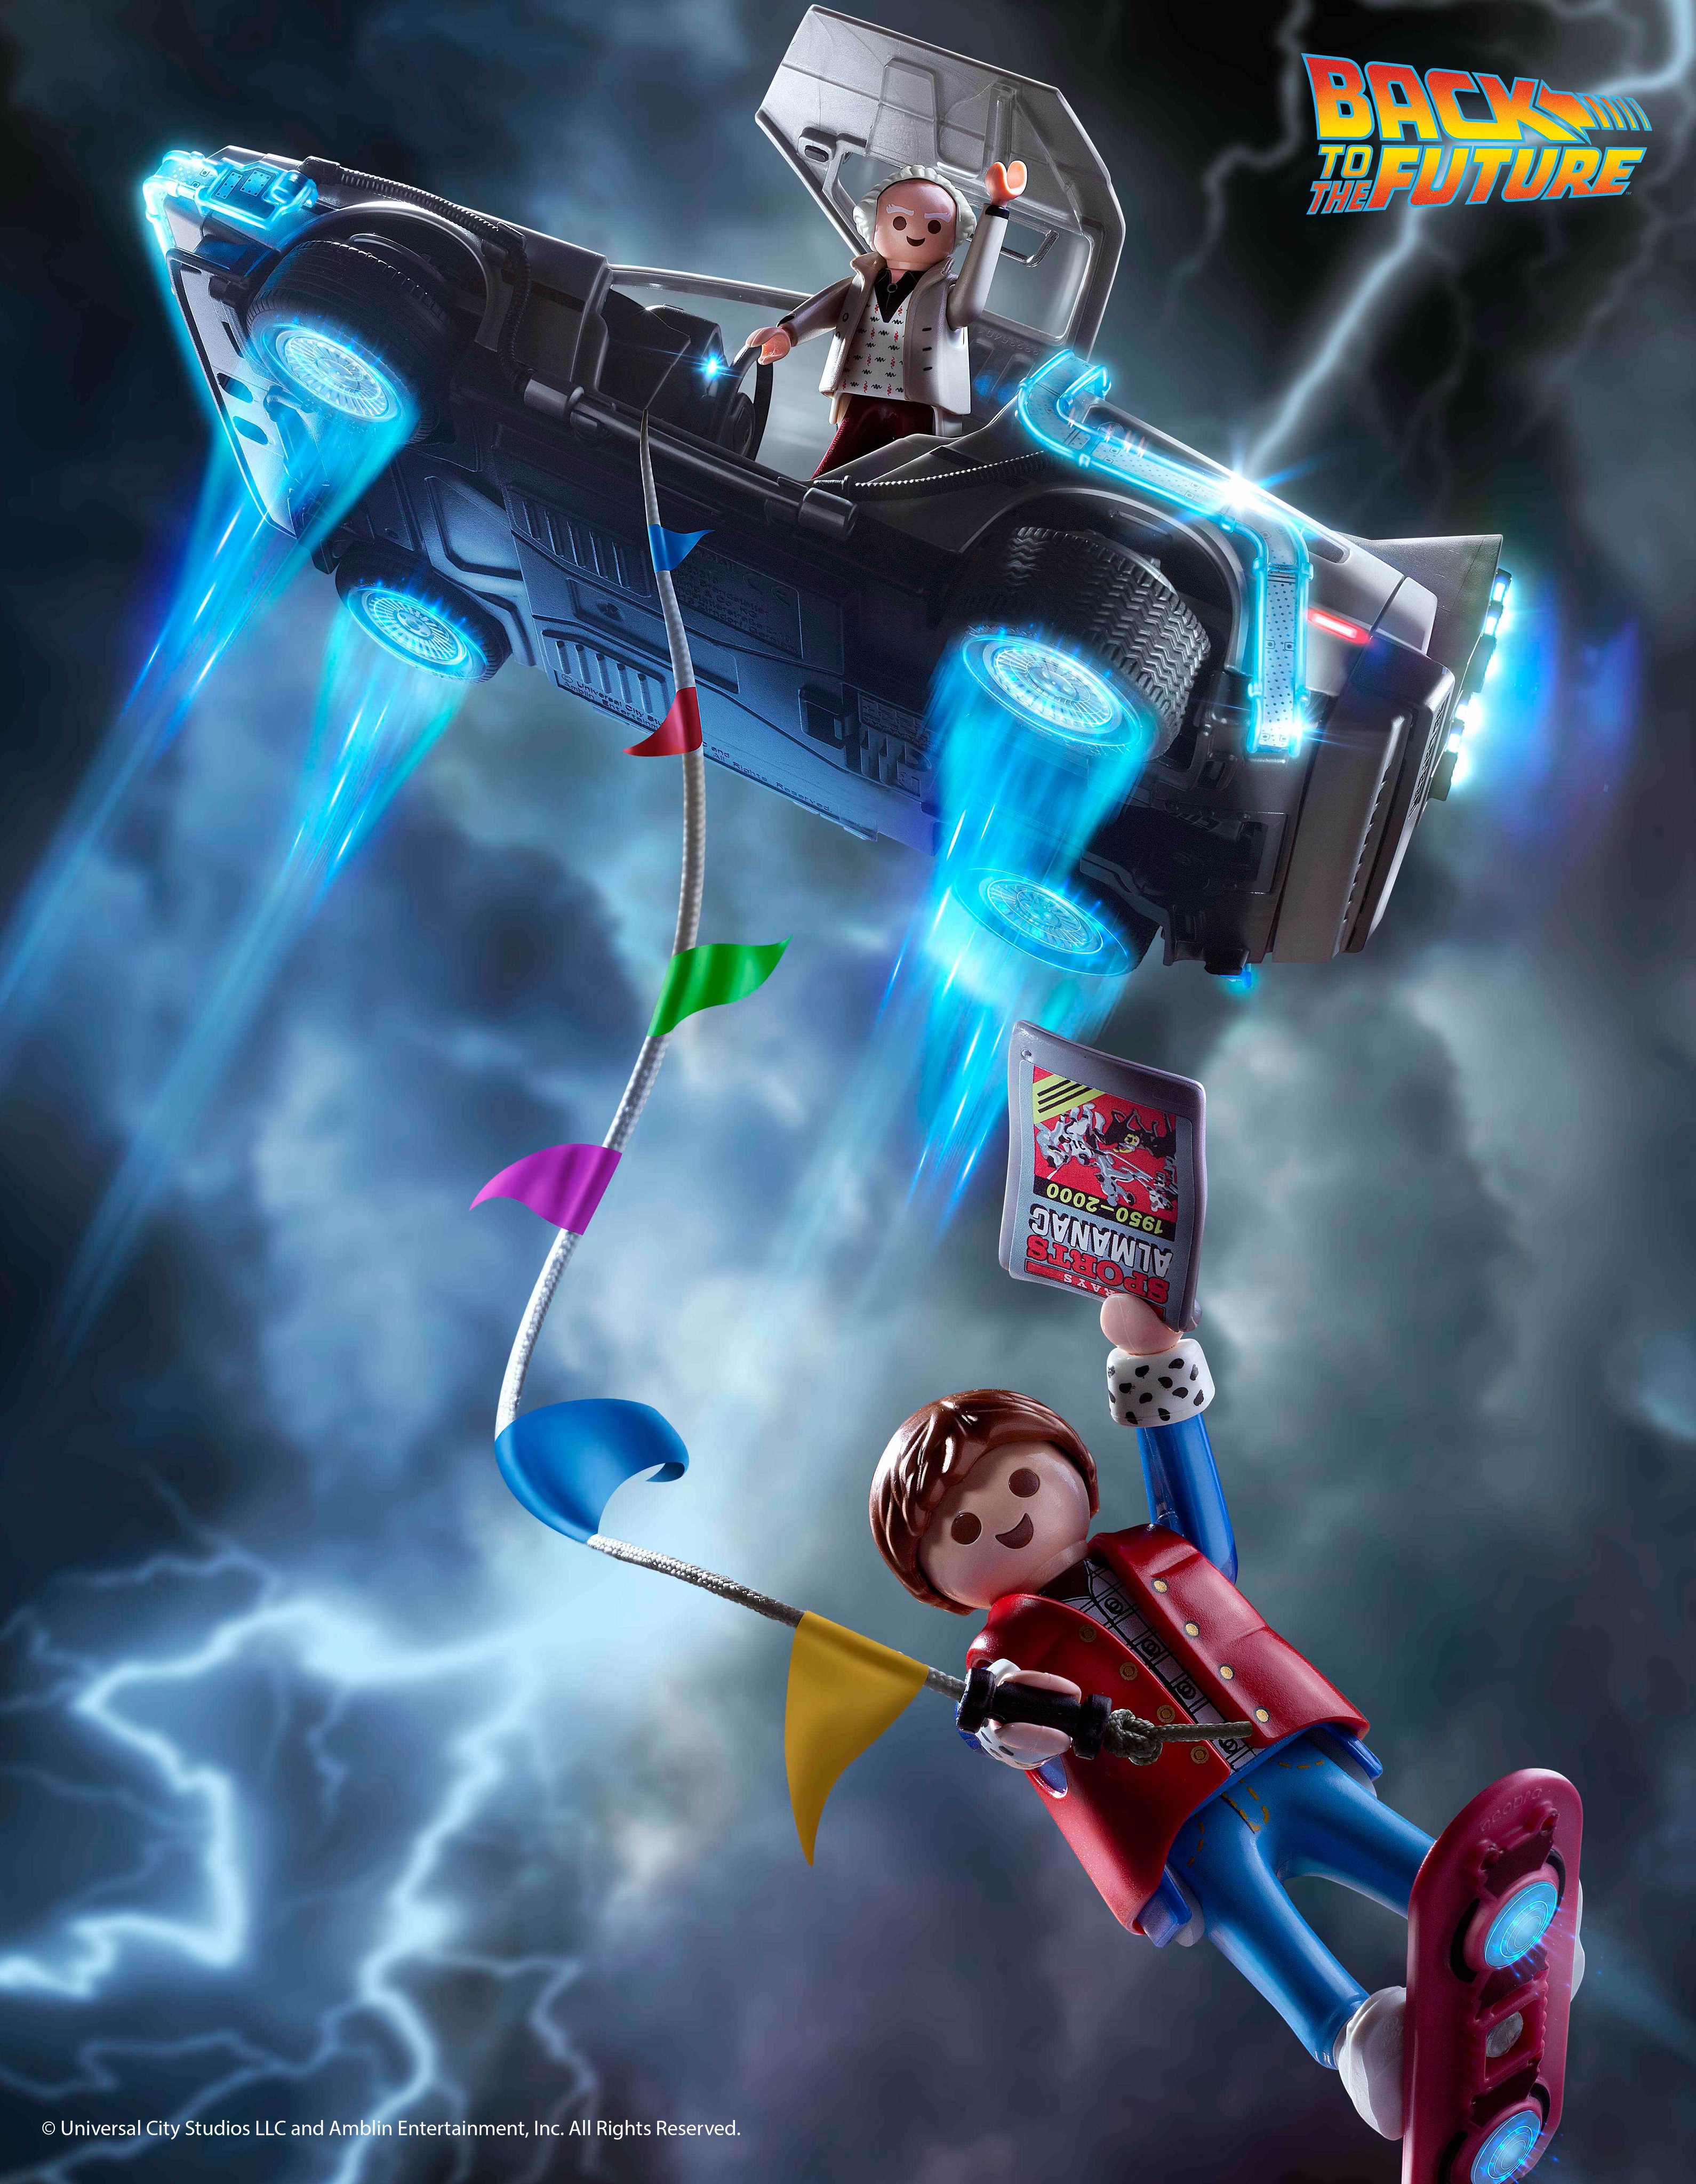 PLAYMOBIL on X: Why do we still not have flying cars in 2021? 🤔 The new  Back to the Future sets from #PLAYMOBIL are now available in stores and  online. 🤩 #BTTF #